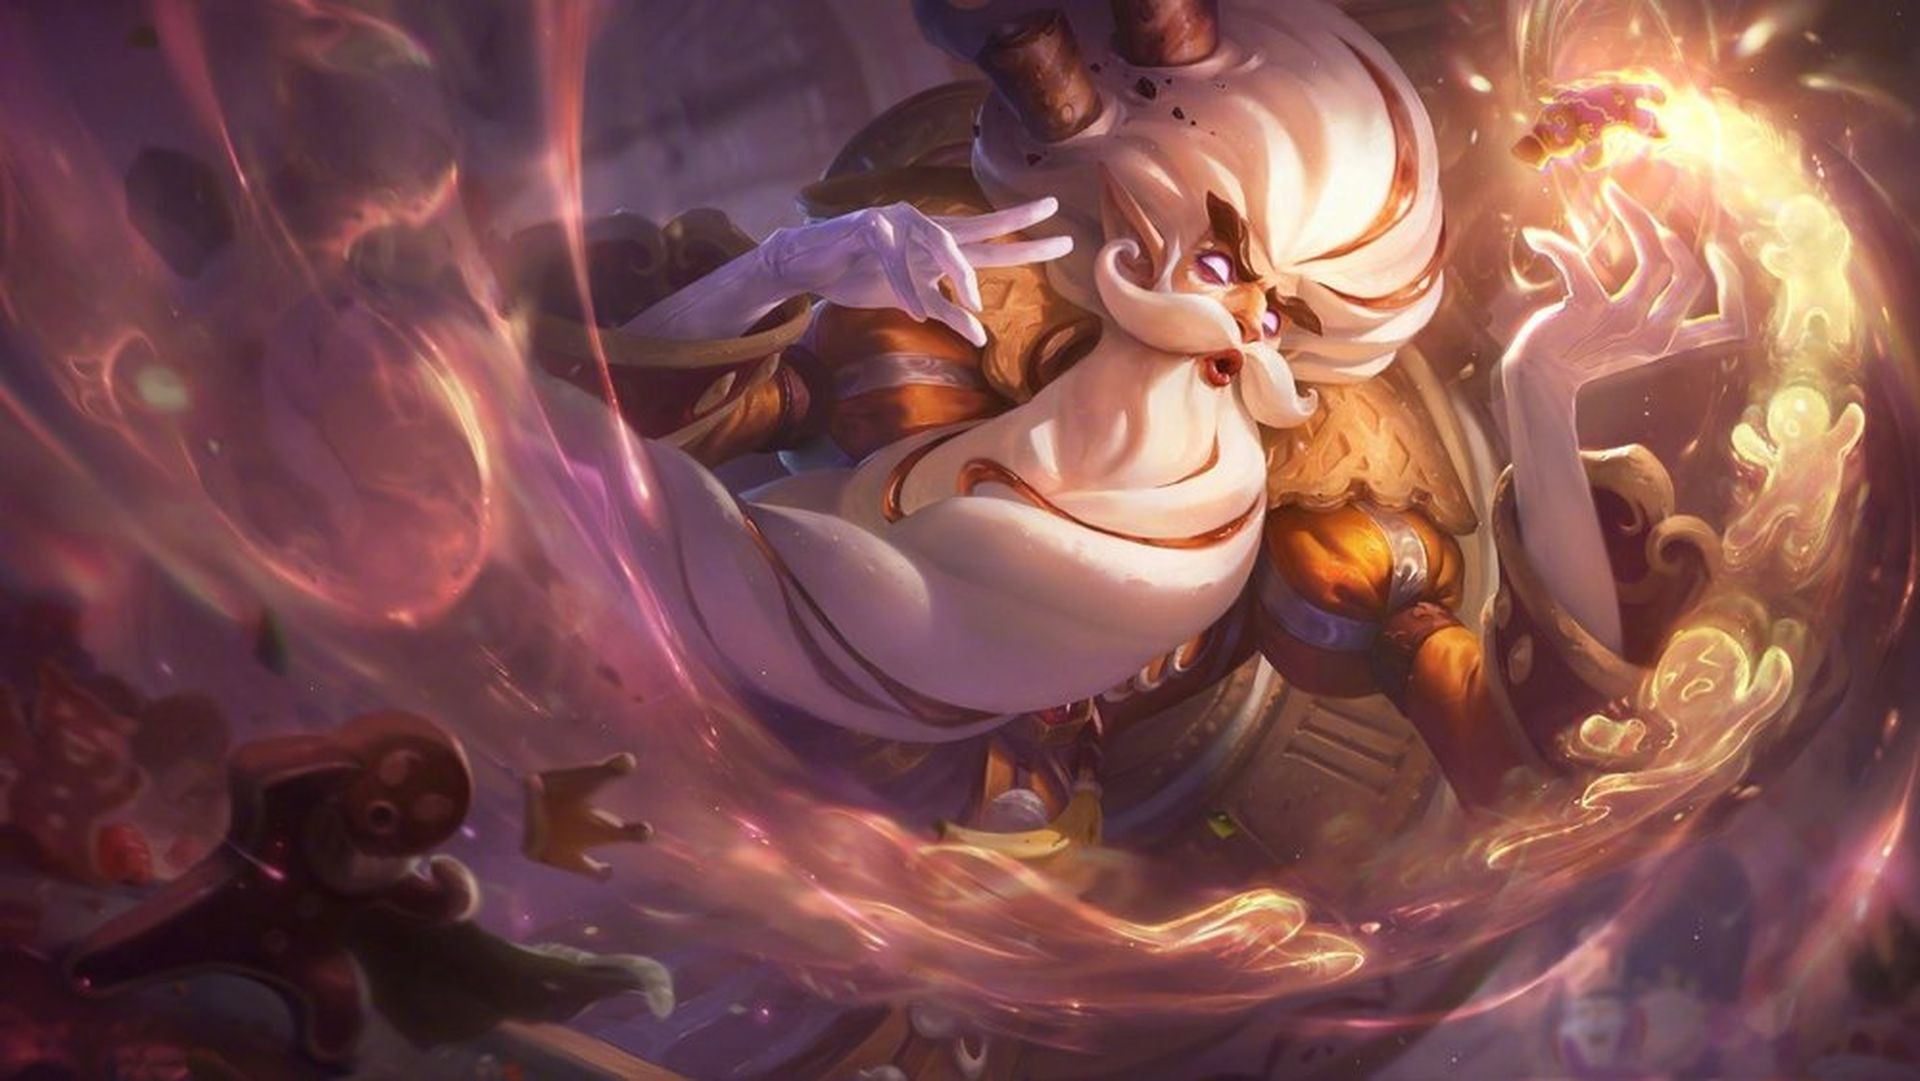 In this article, we are going to be covering League of Legends MMO release date, classes, and more, so you know what is on its way from Riot Games.